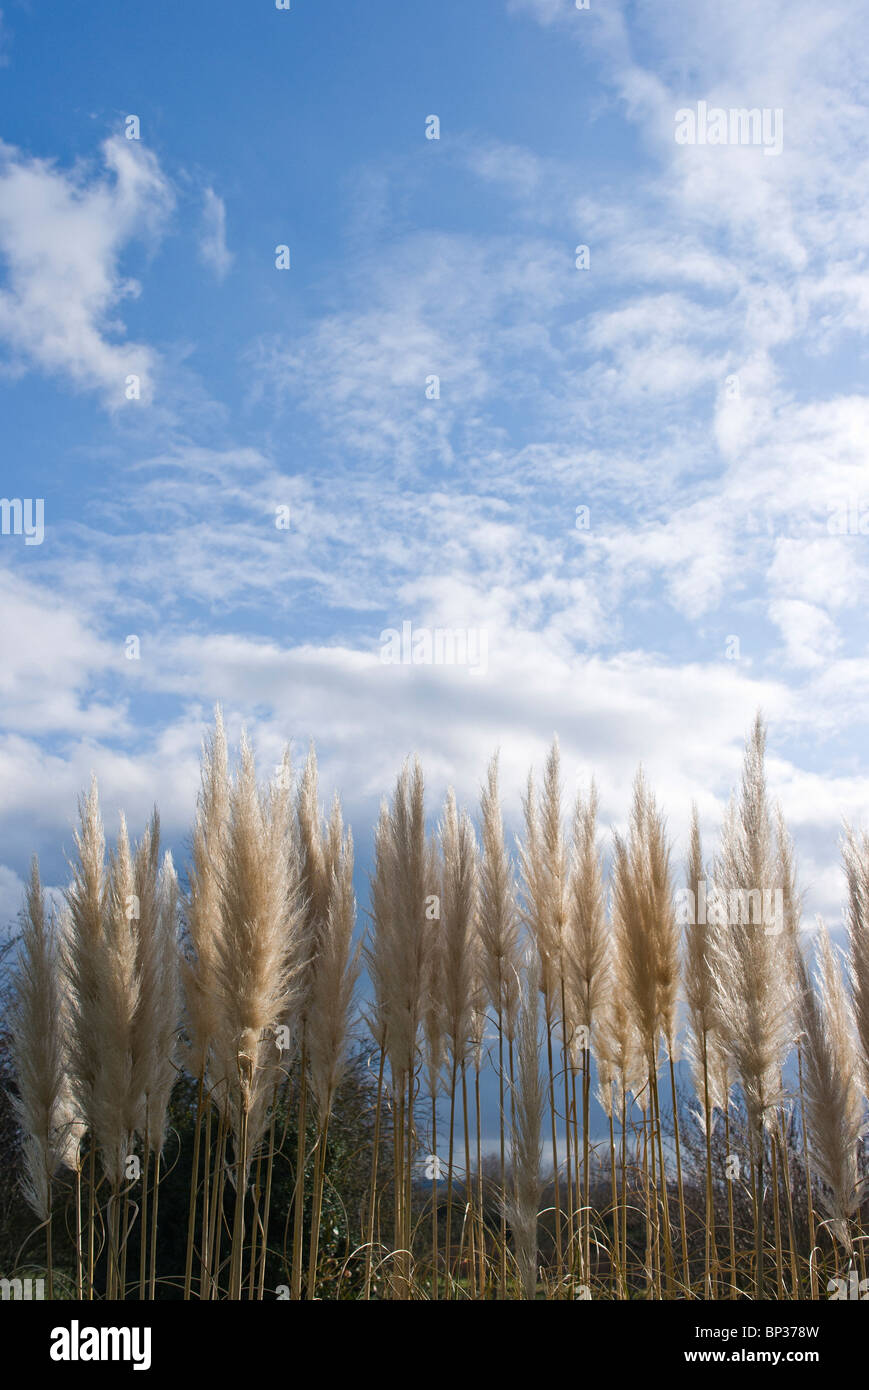 Pampas grass plumes pointing towards partial clouded sky Stock Photo